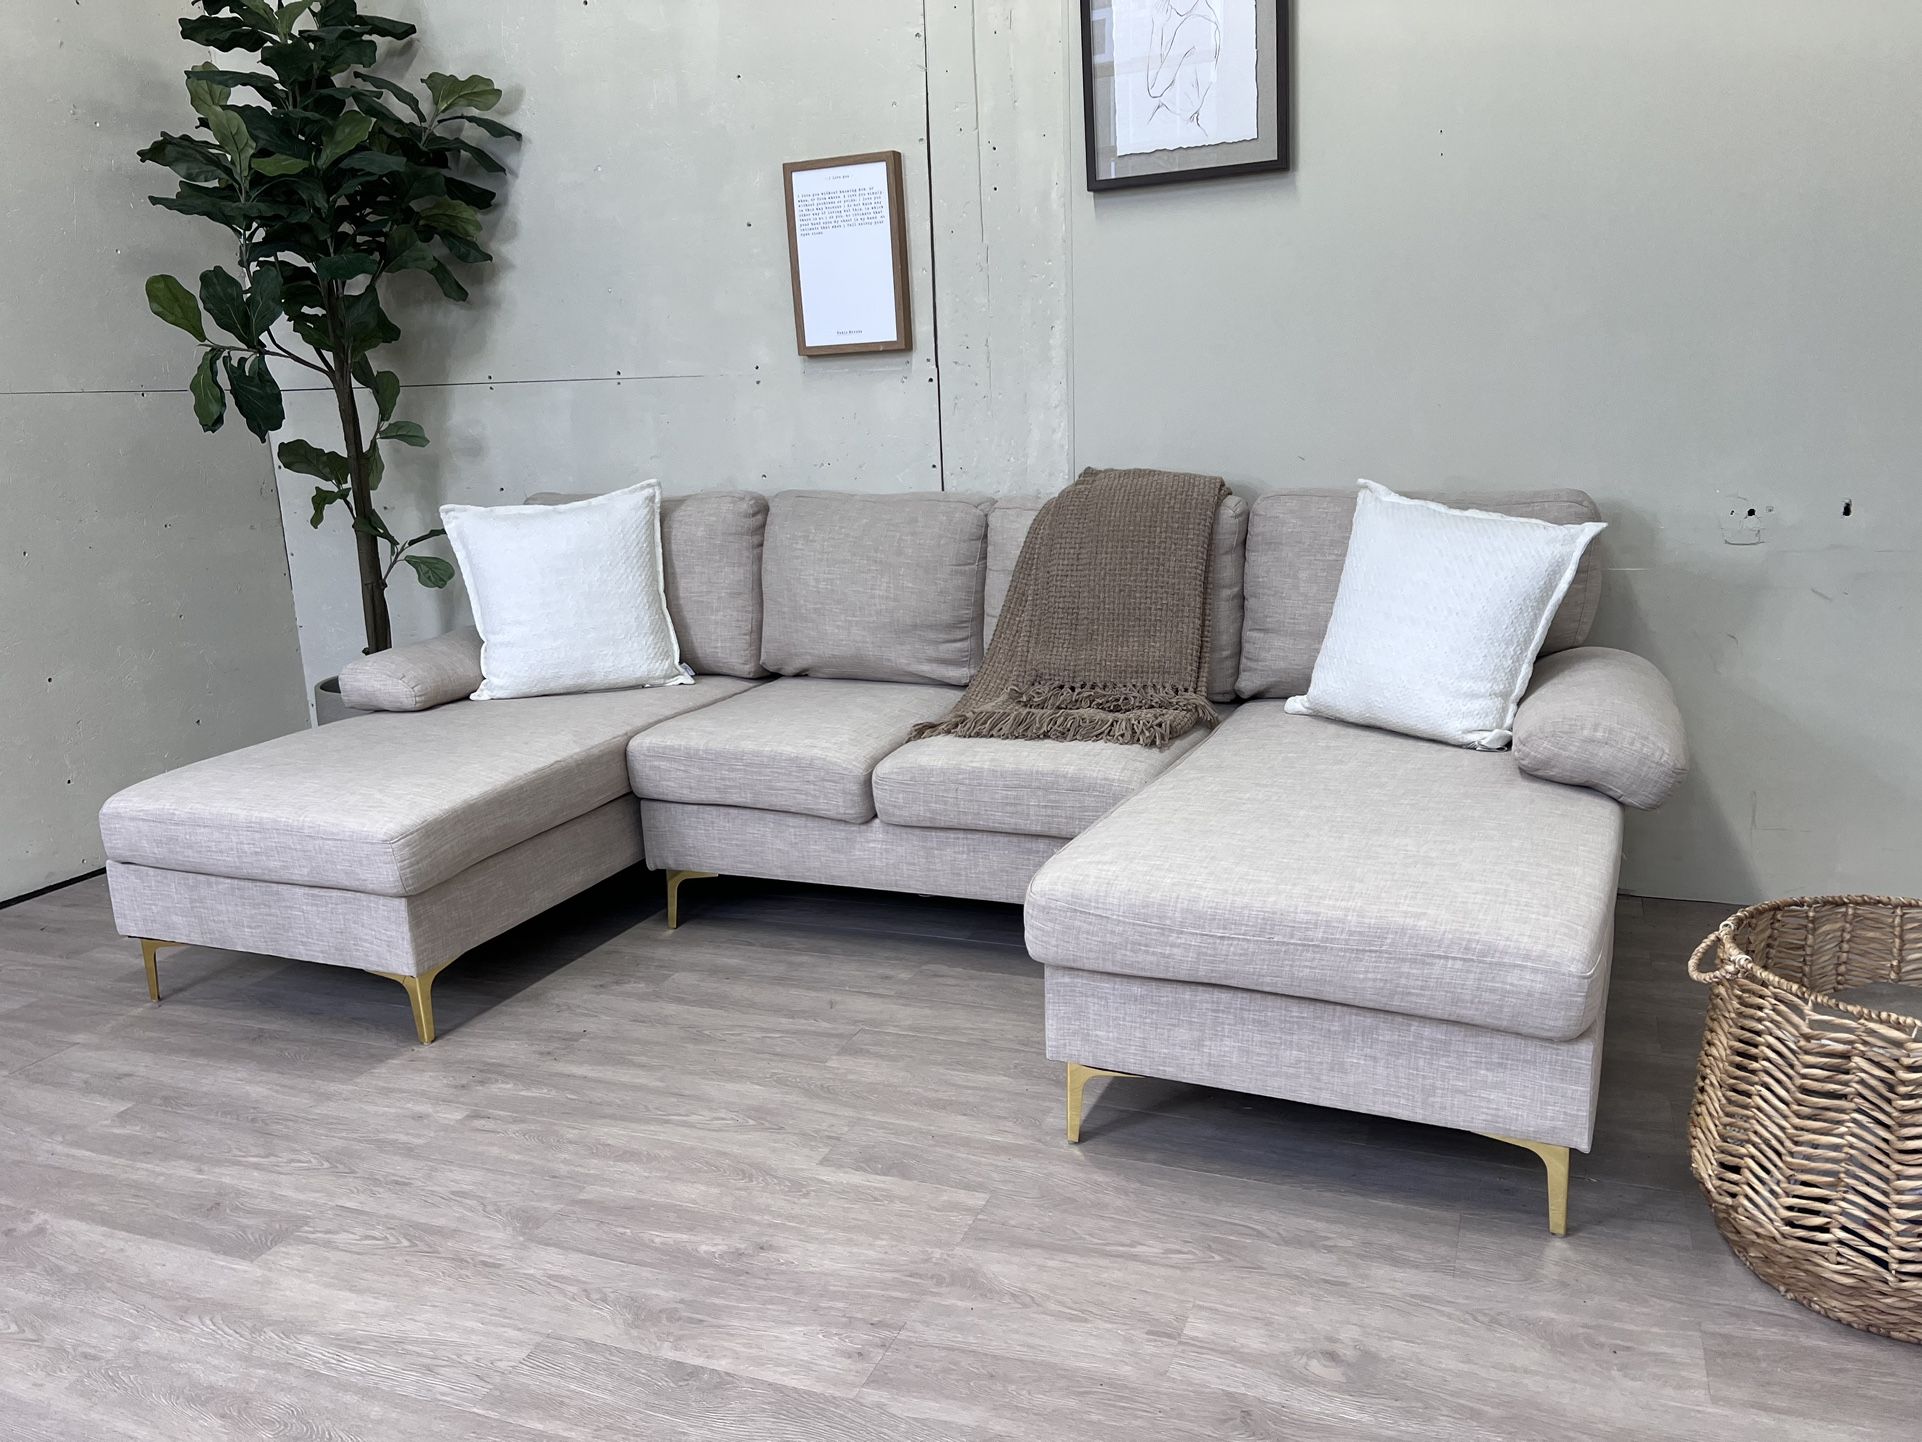 FREE DELIVERY! 🚚 - Cream Modern Gold Legs U Sectional Couch